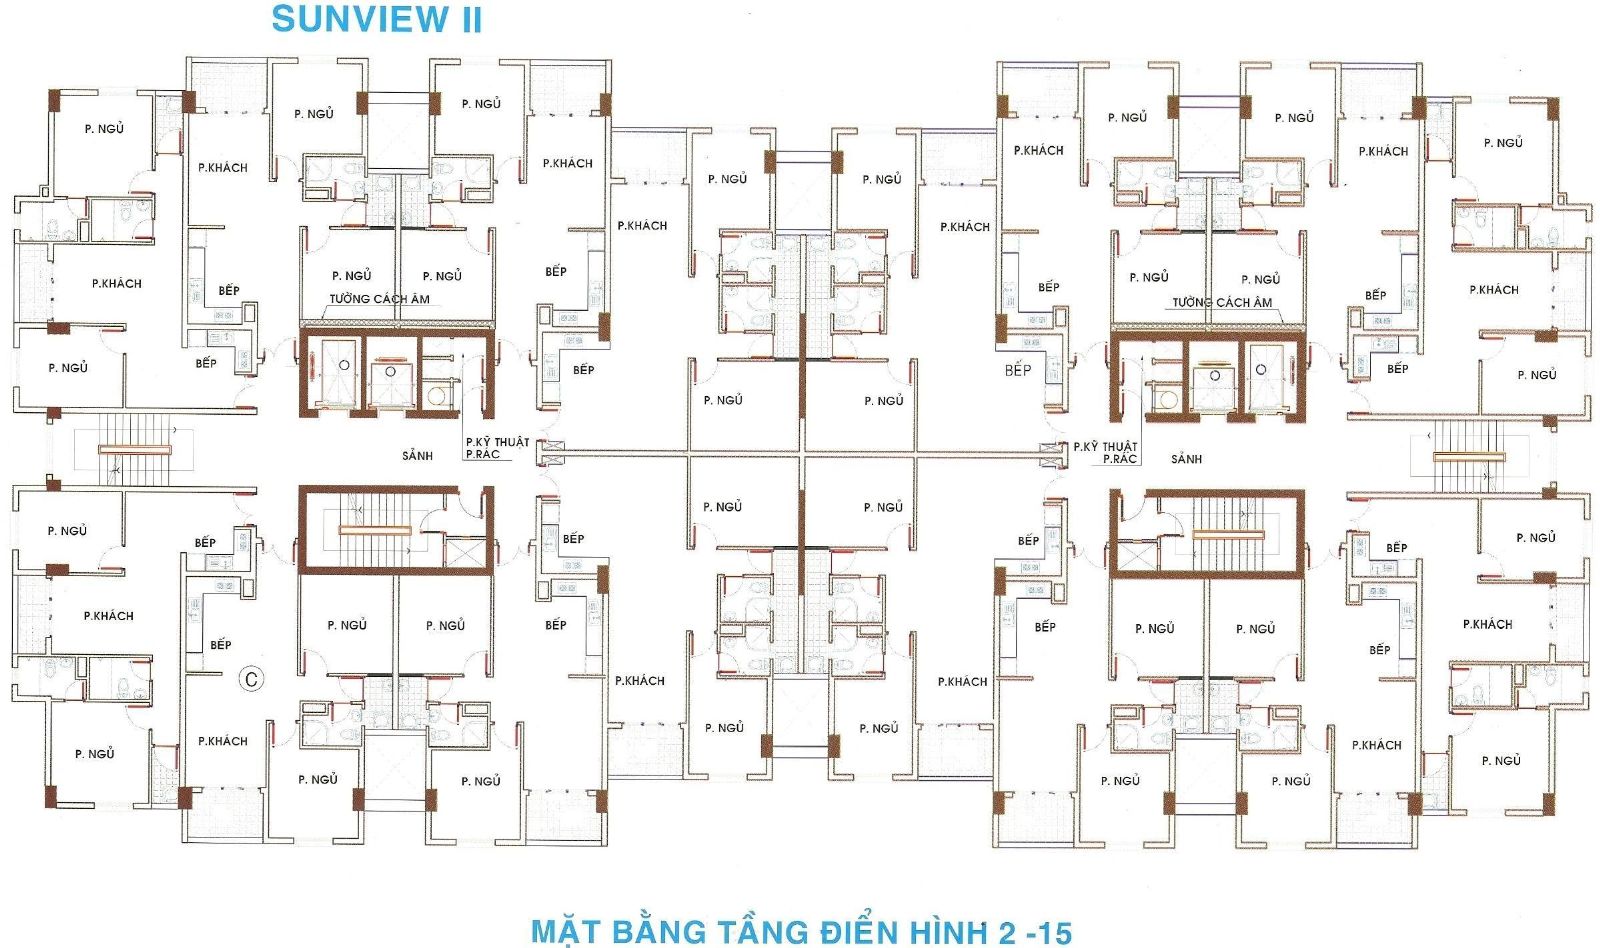 Hạ tầng, quy hoạch của Sunview | 2